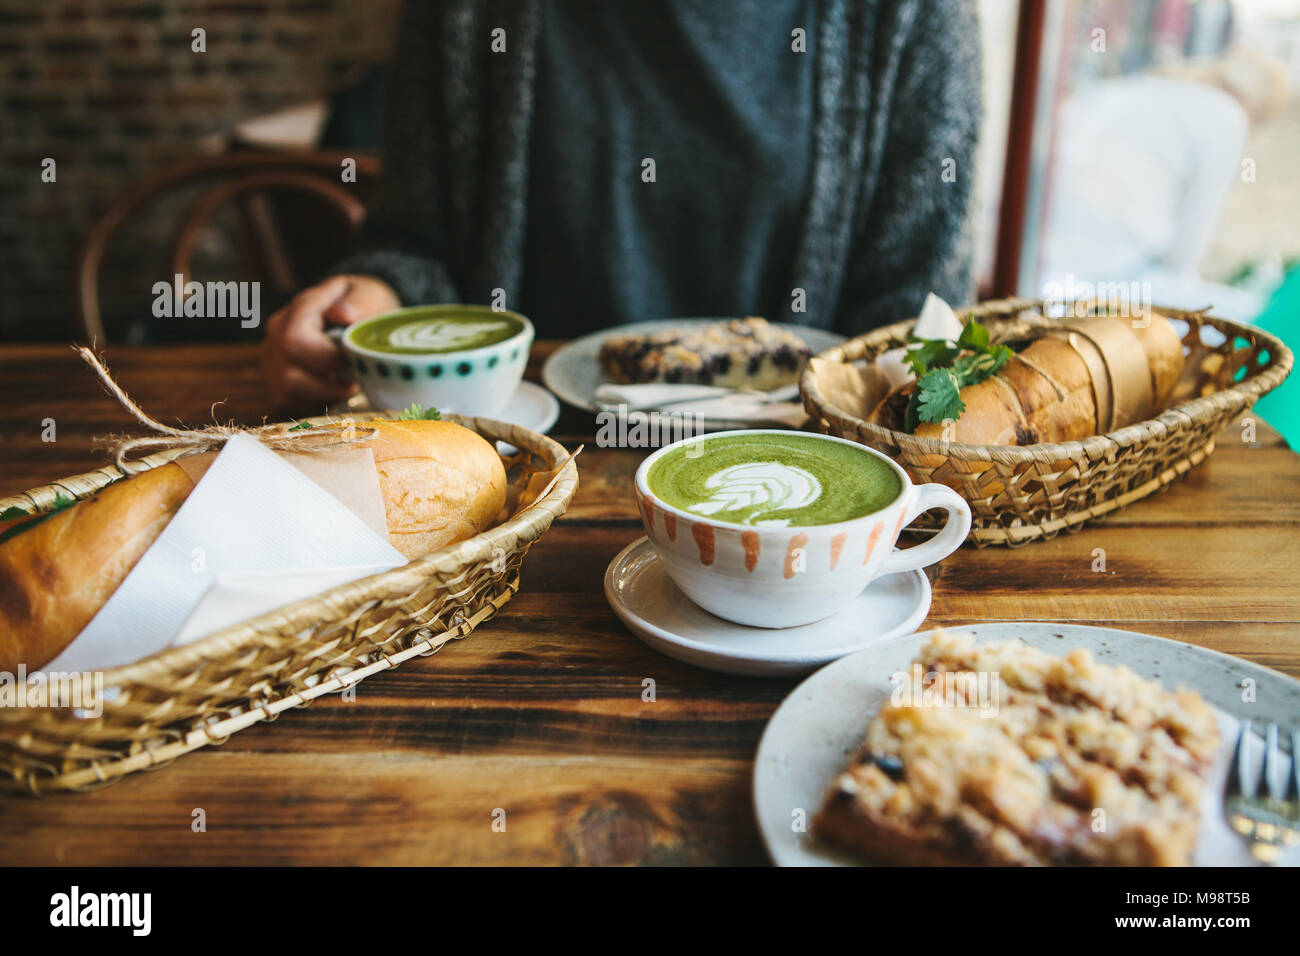 The girl sitting in cafe and holding mug with green tea with milk next to piece of sweet pie and two sandwiches with vegetables Stock Photo